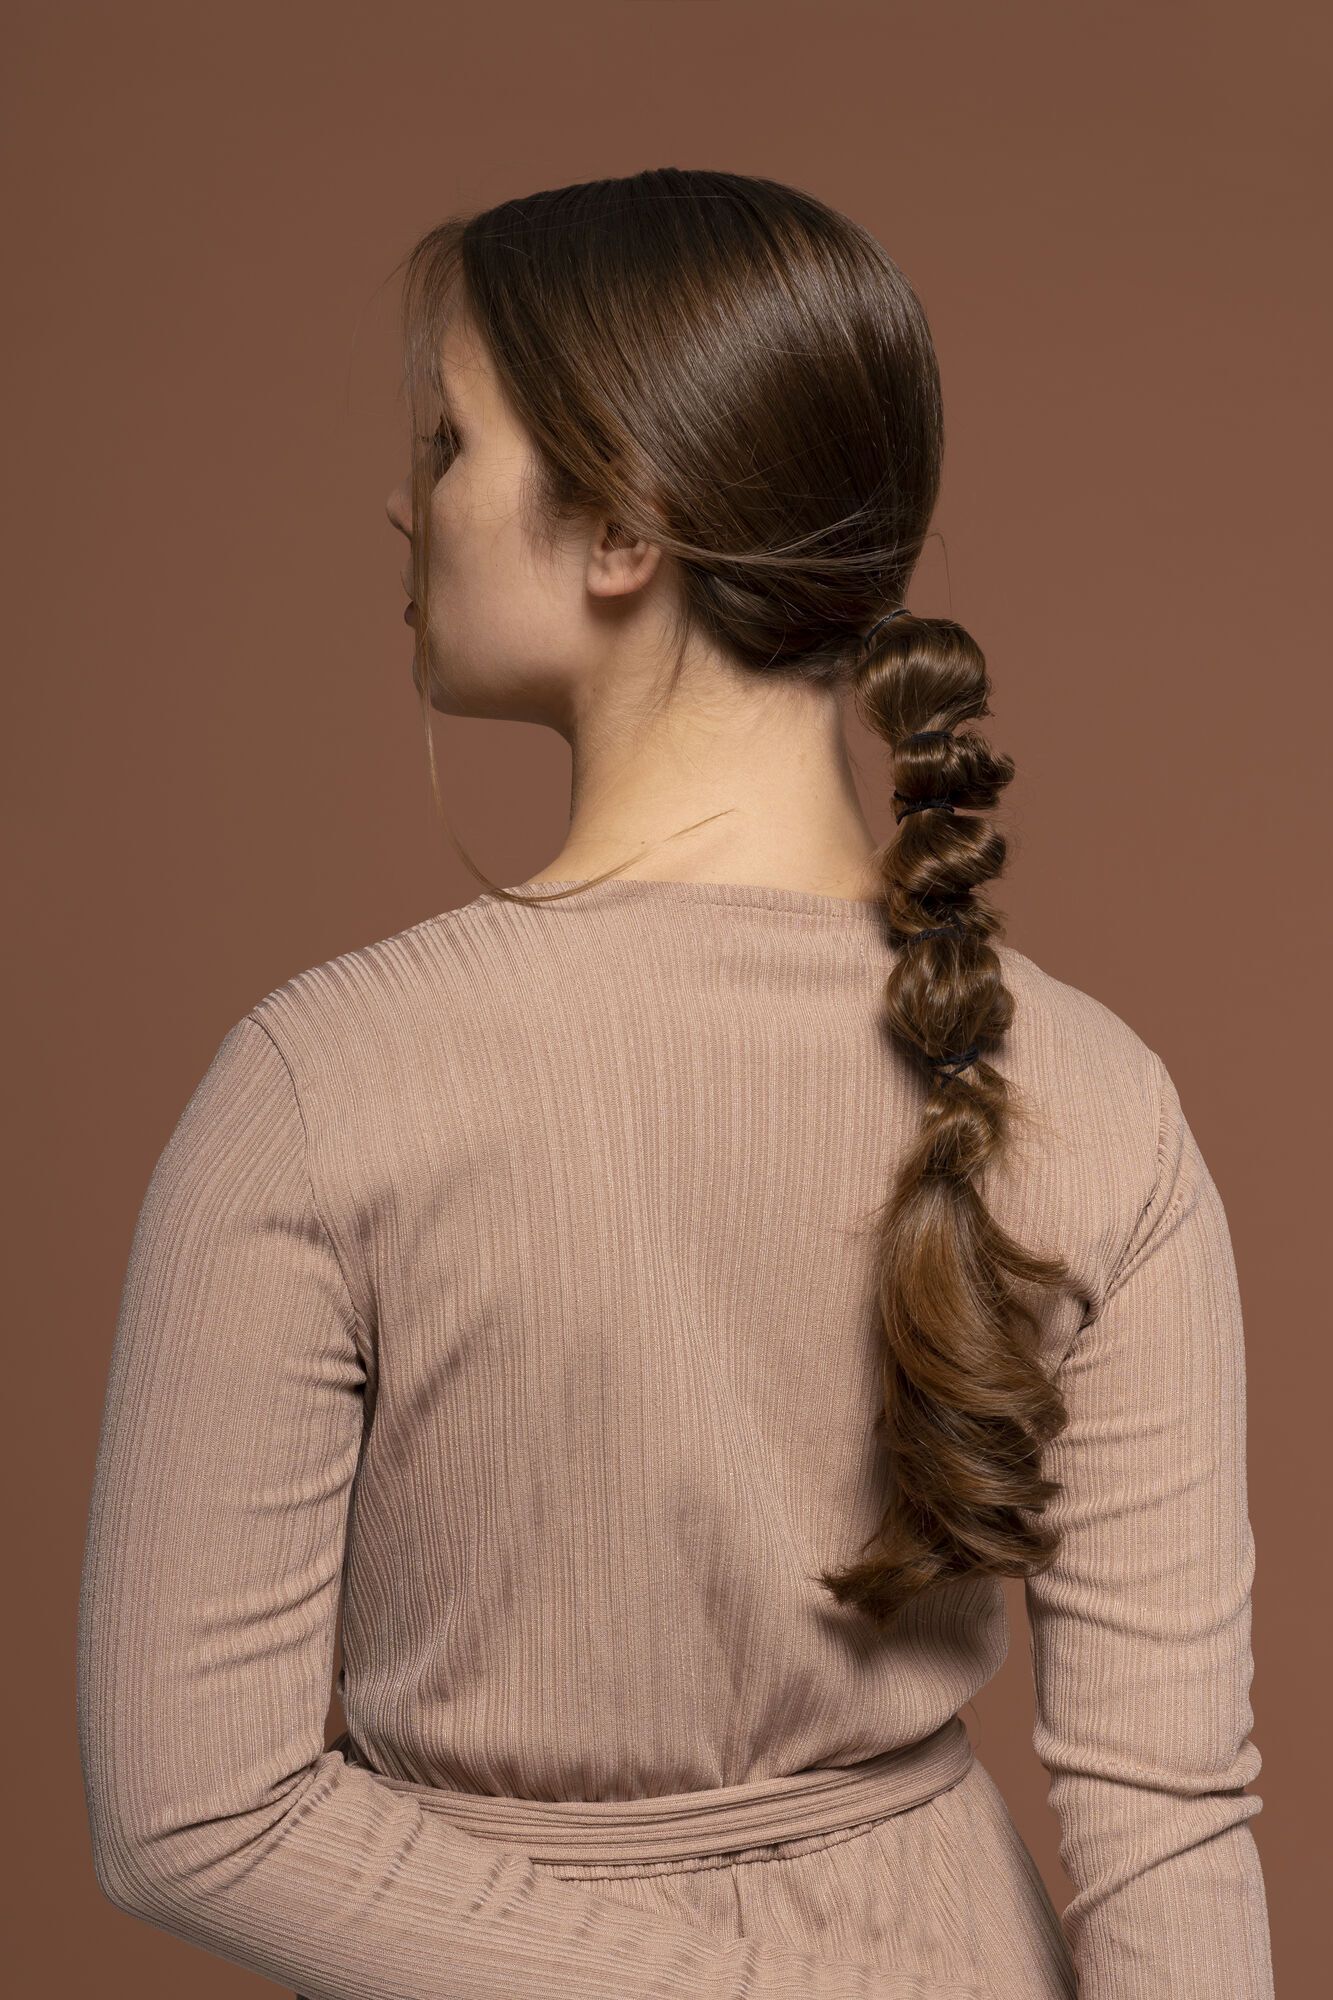 Most fashionable hairstyle for long hair owners is named: it won't take long. Photo